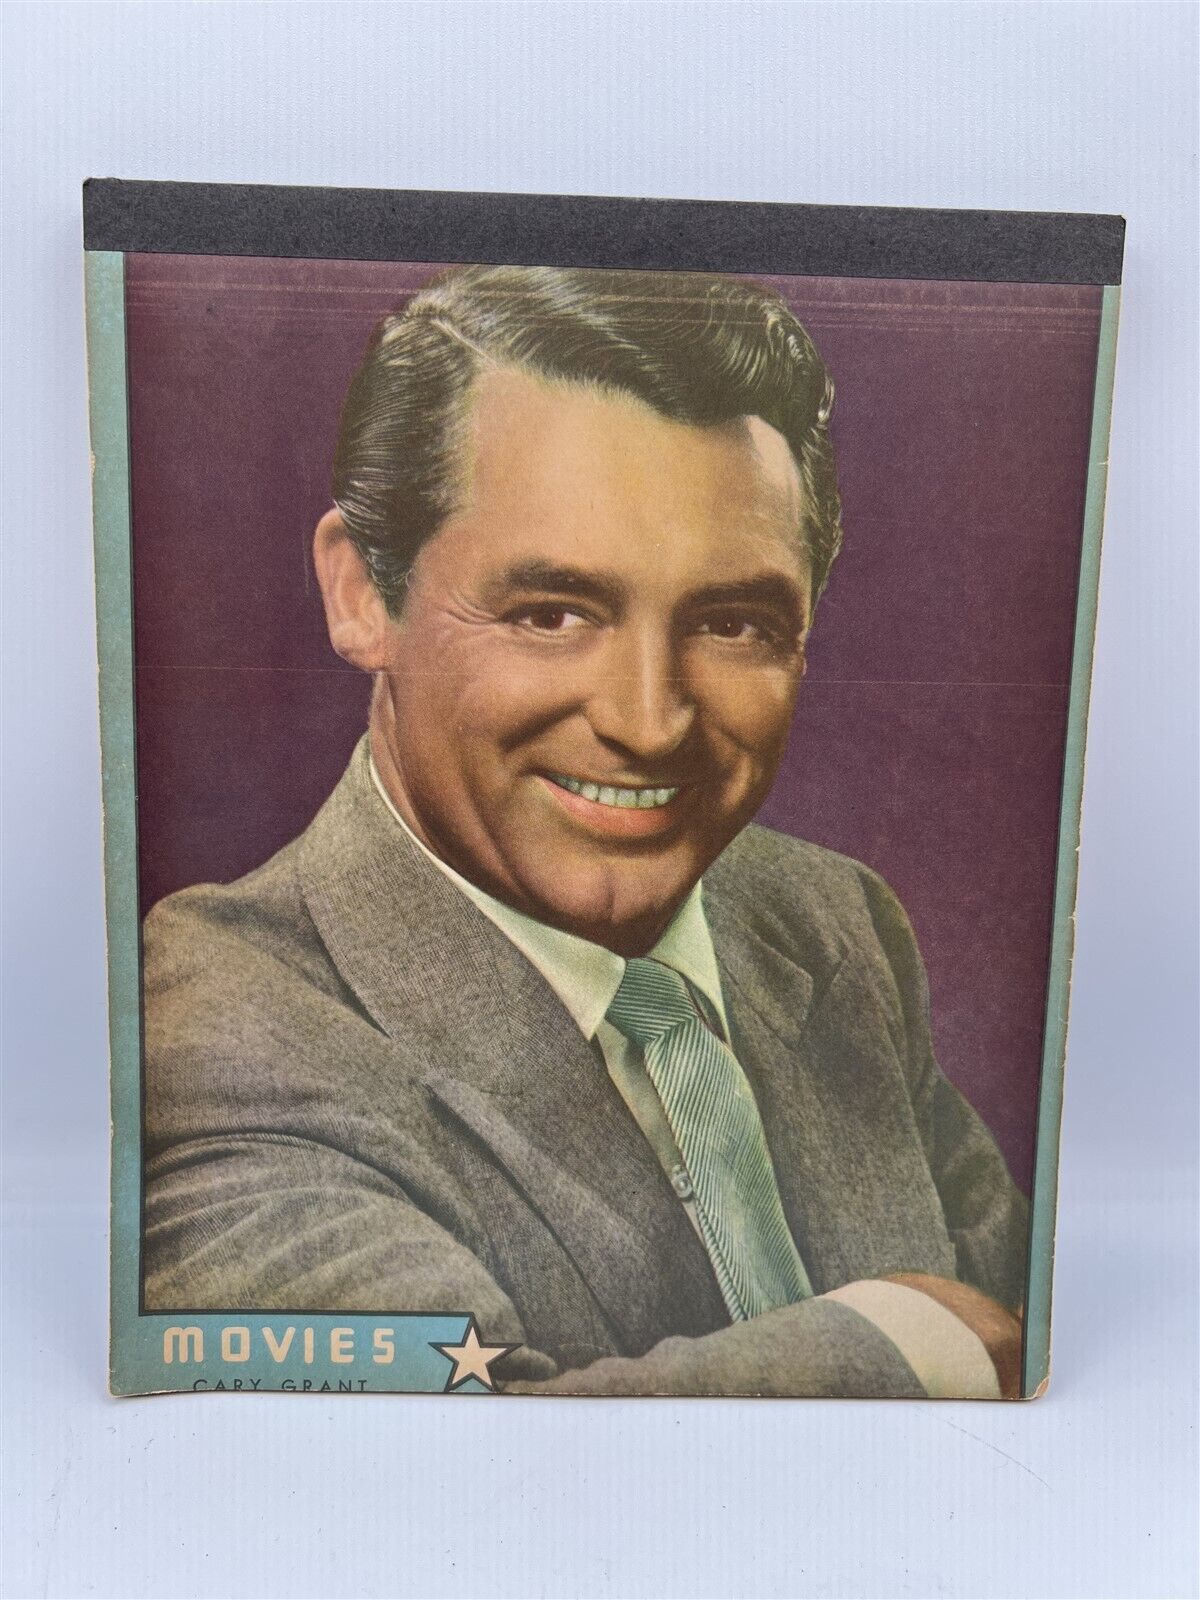 VINTAGE LINED NOTEBOOK MOVIES CARY GRANT